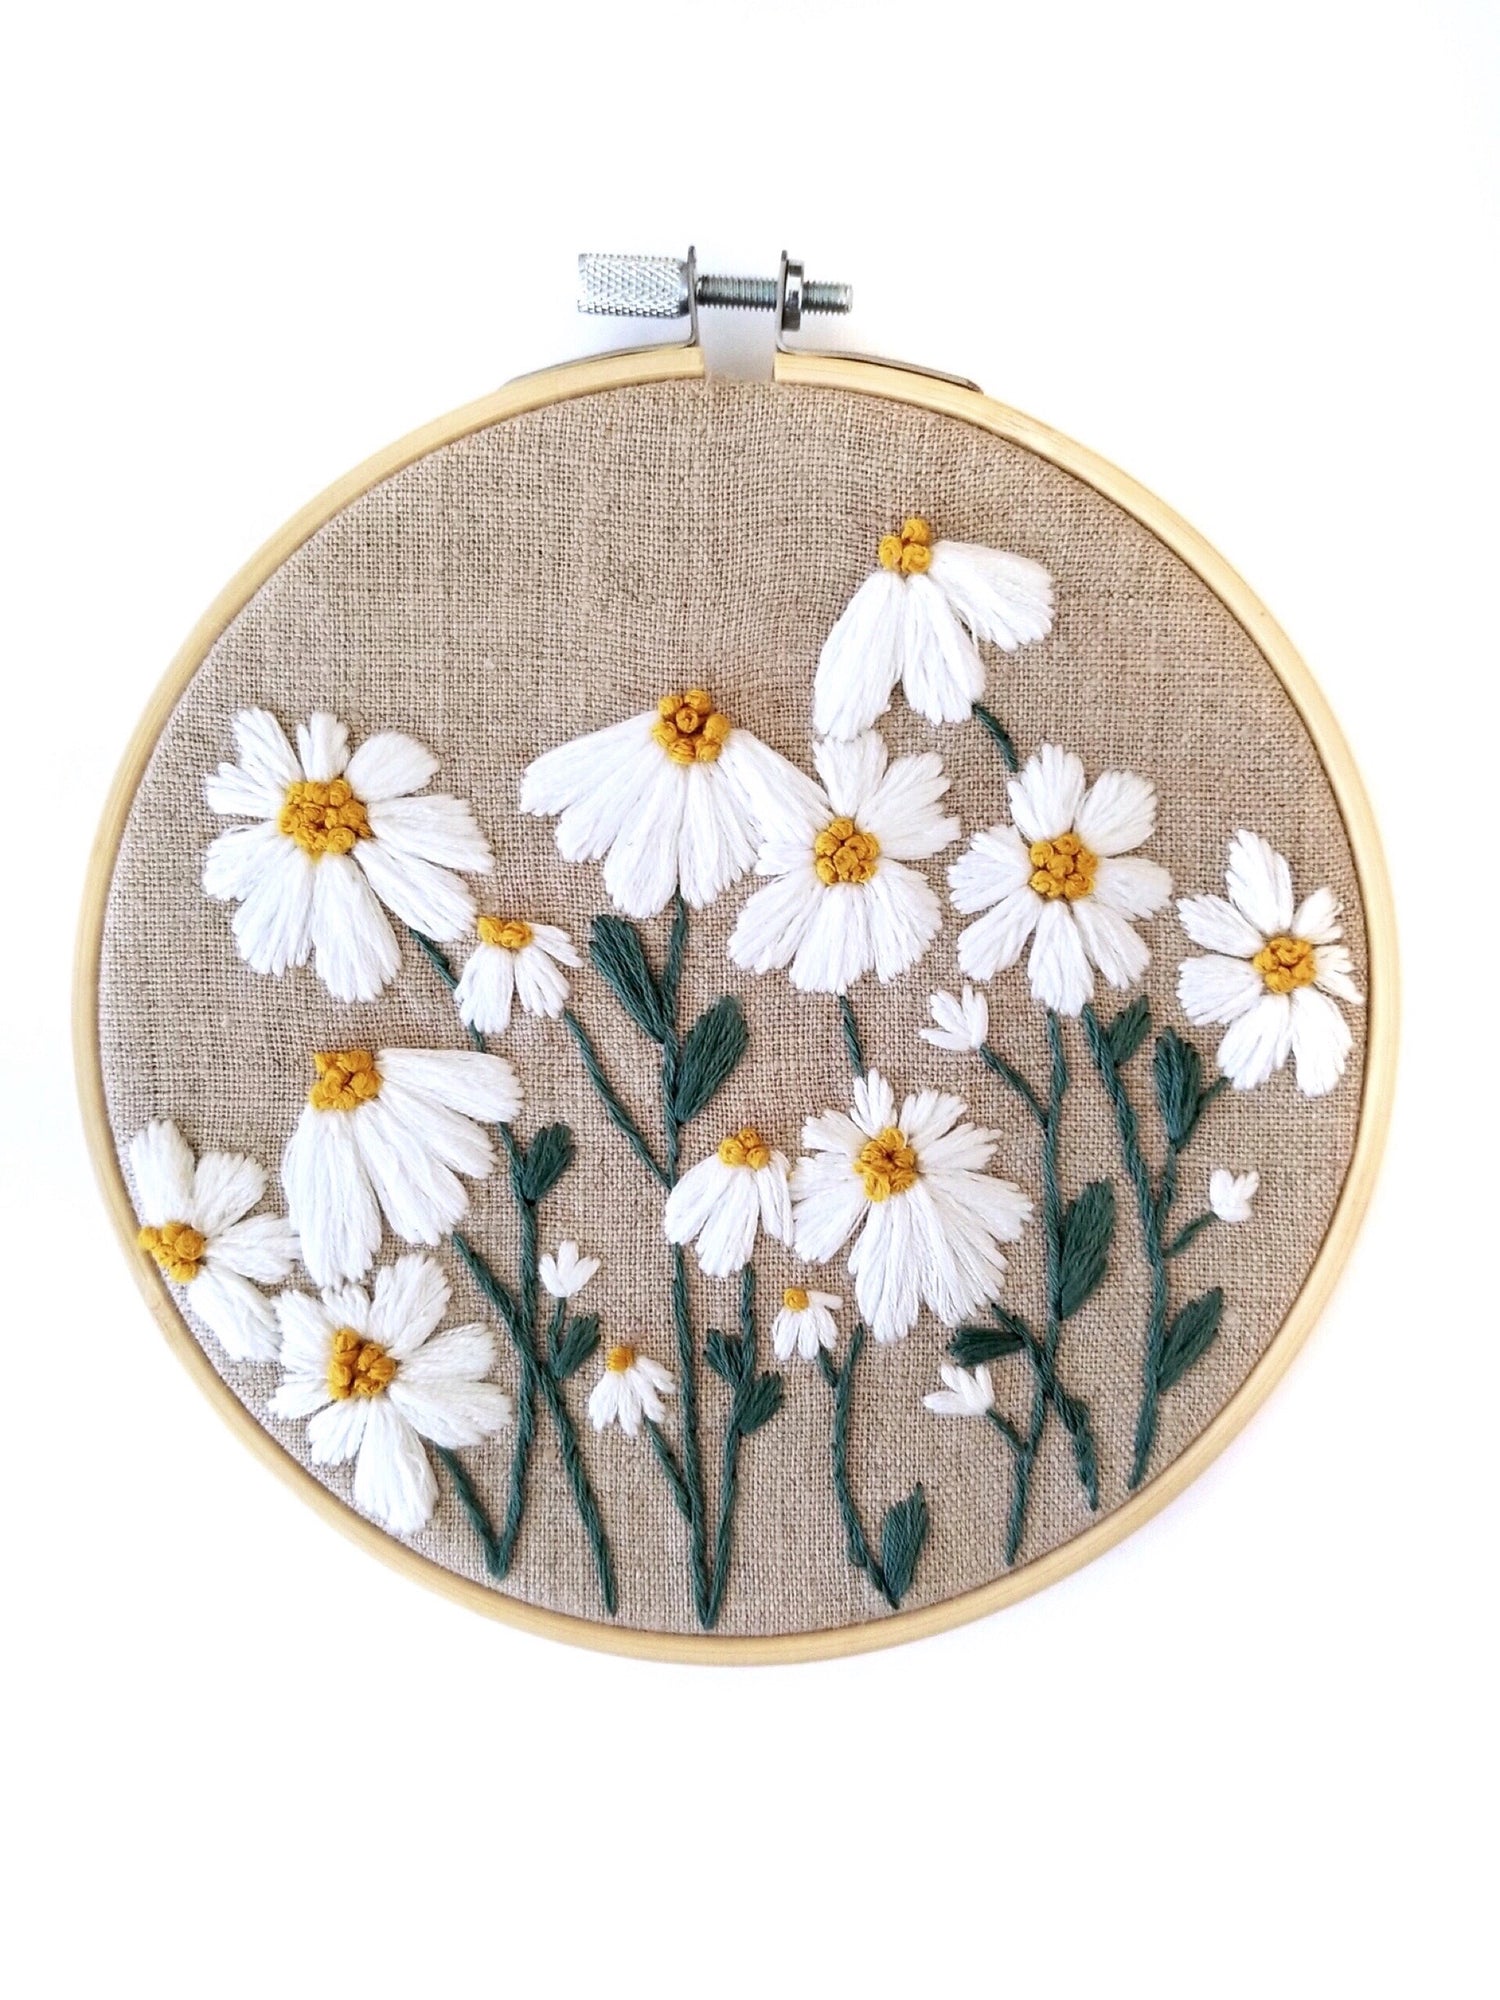 Stick and Stitch Embroidery Designs – threadunraveled